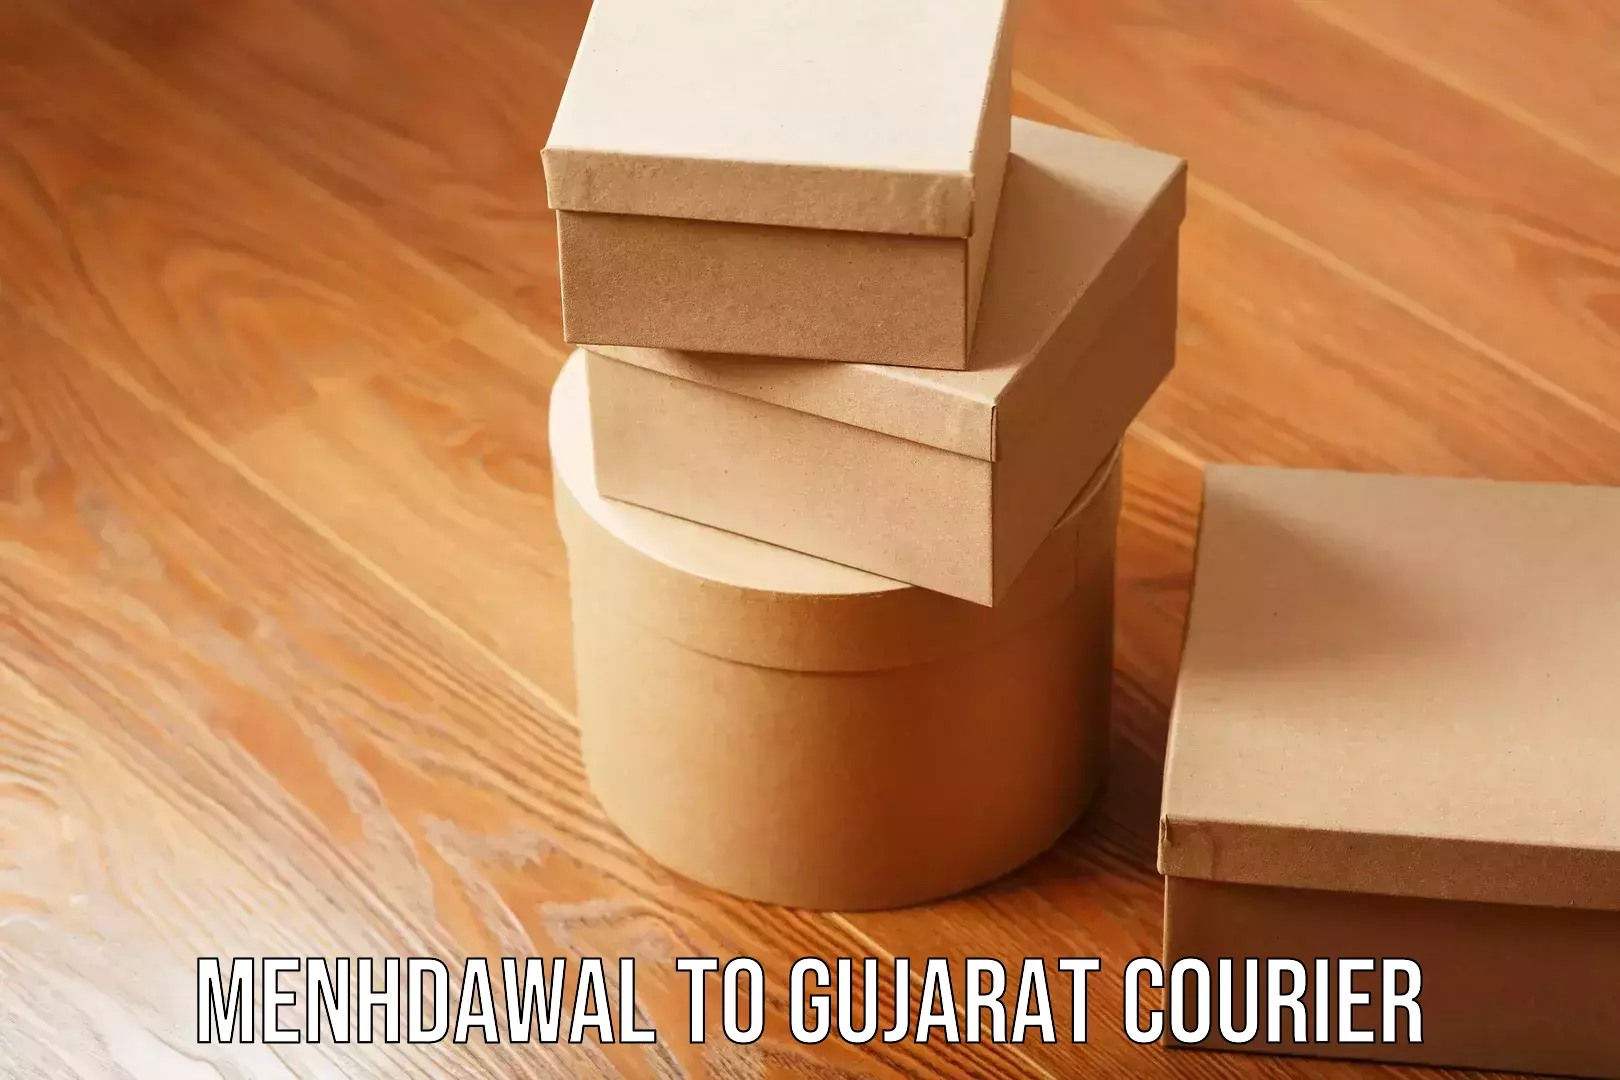 Dependable moving services Menhdawal to Gujarat